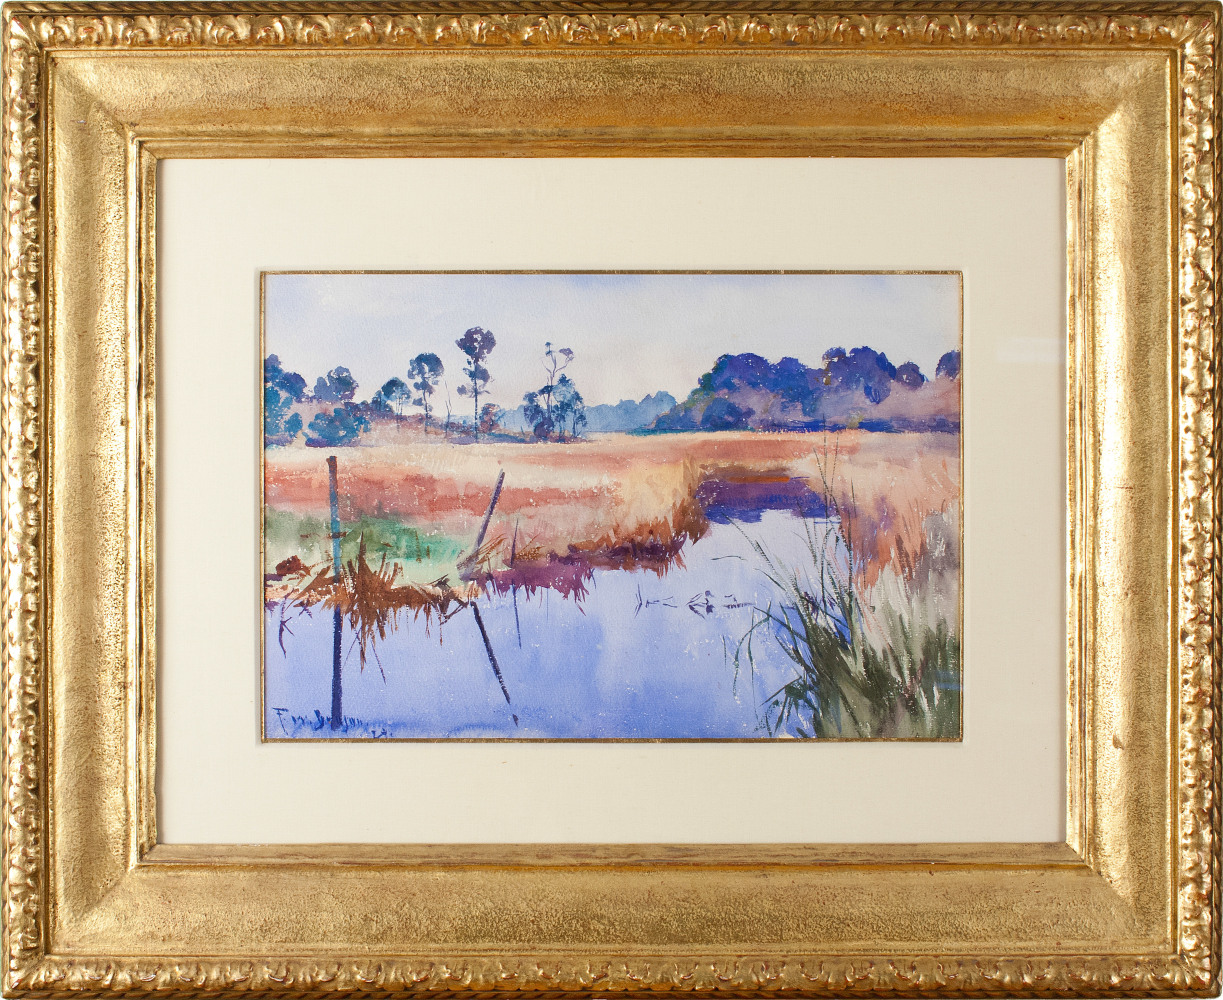 Colorful watercolor by Frank Benson of a river in Alabama (framed).